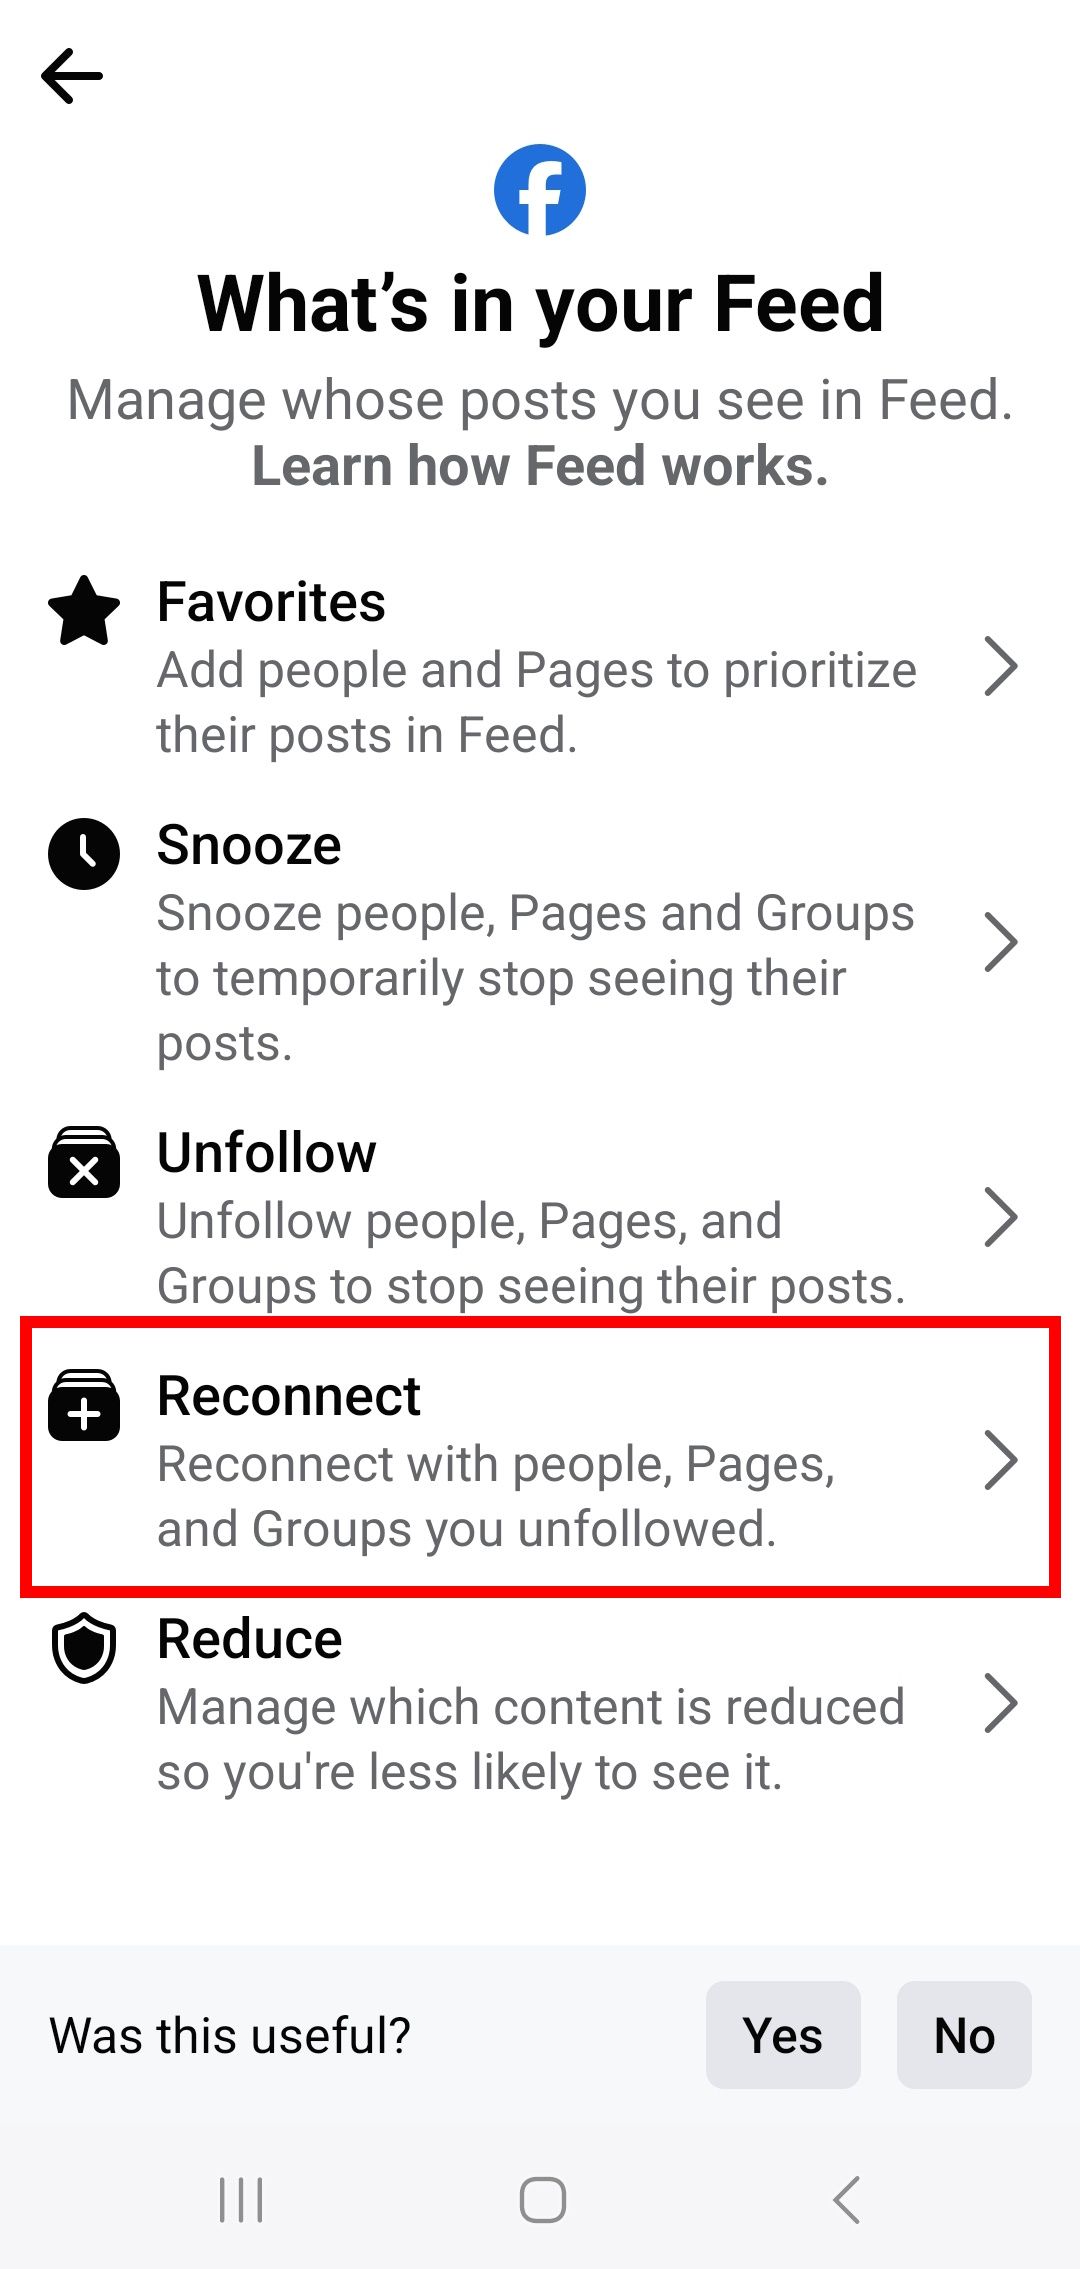 red rectangle outline highlighting reconnect option in what's in your feed